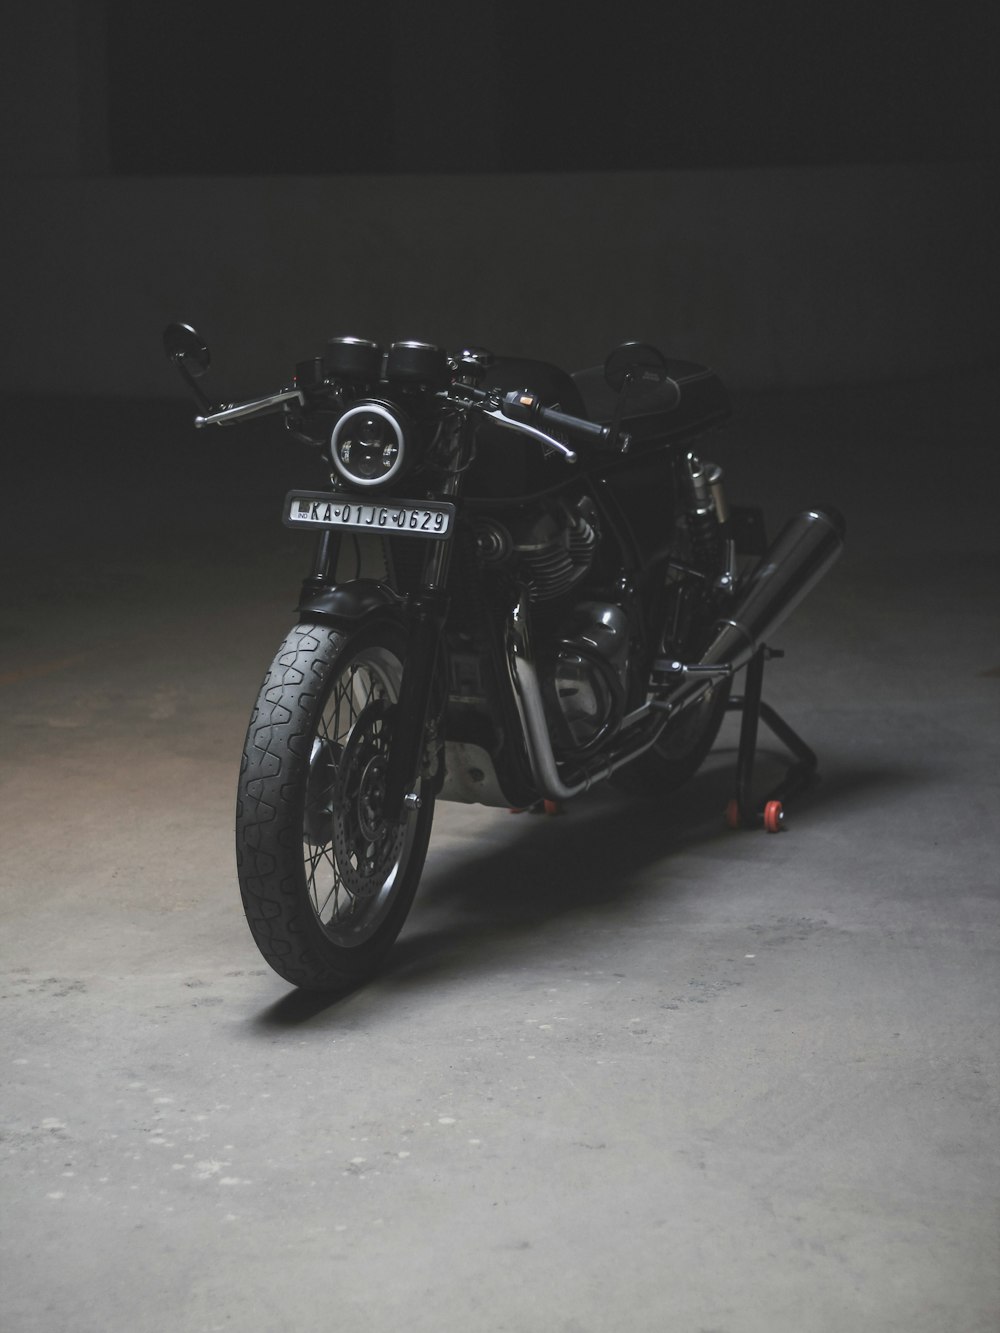 black motorcycle on gray pavement